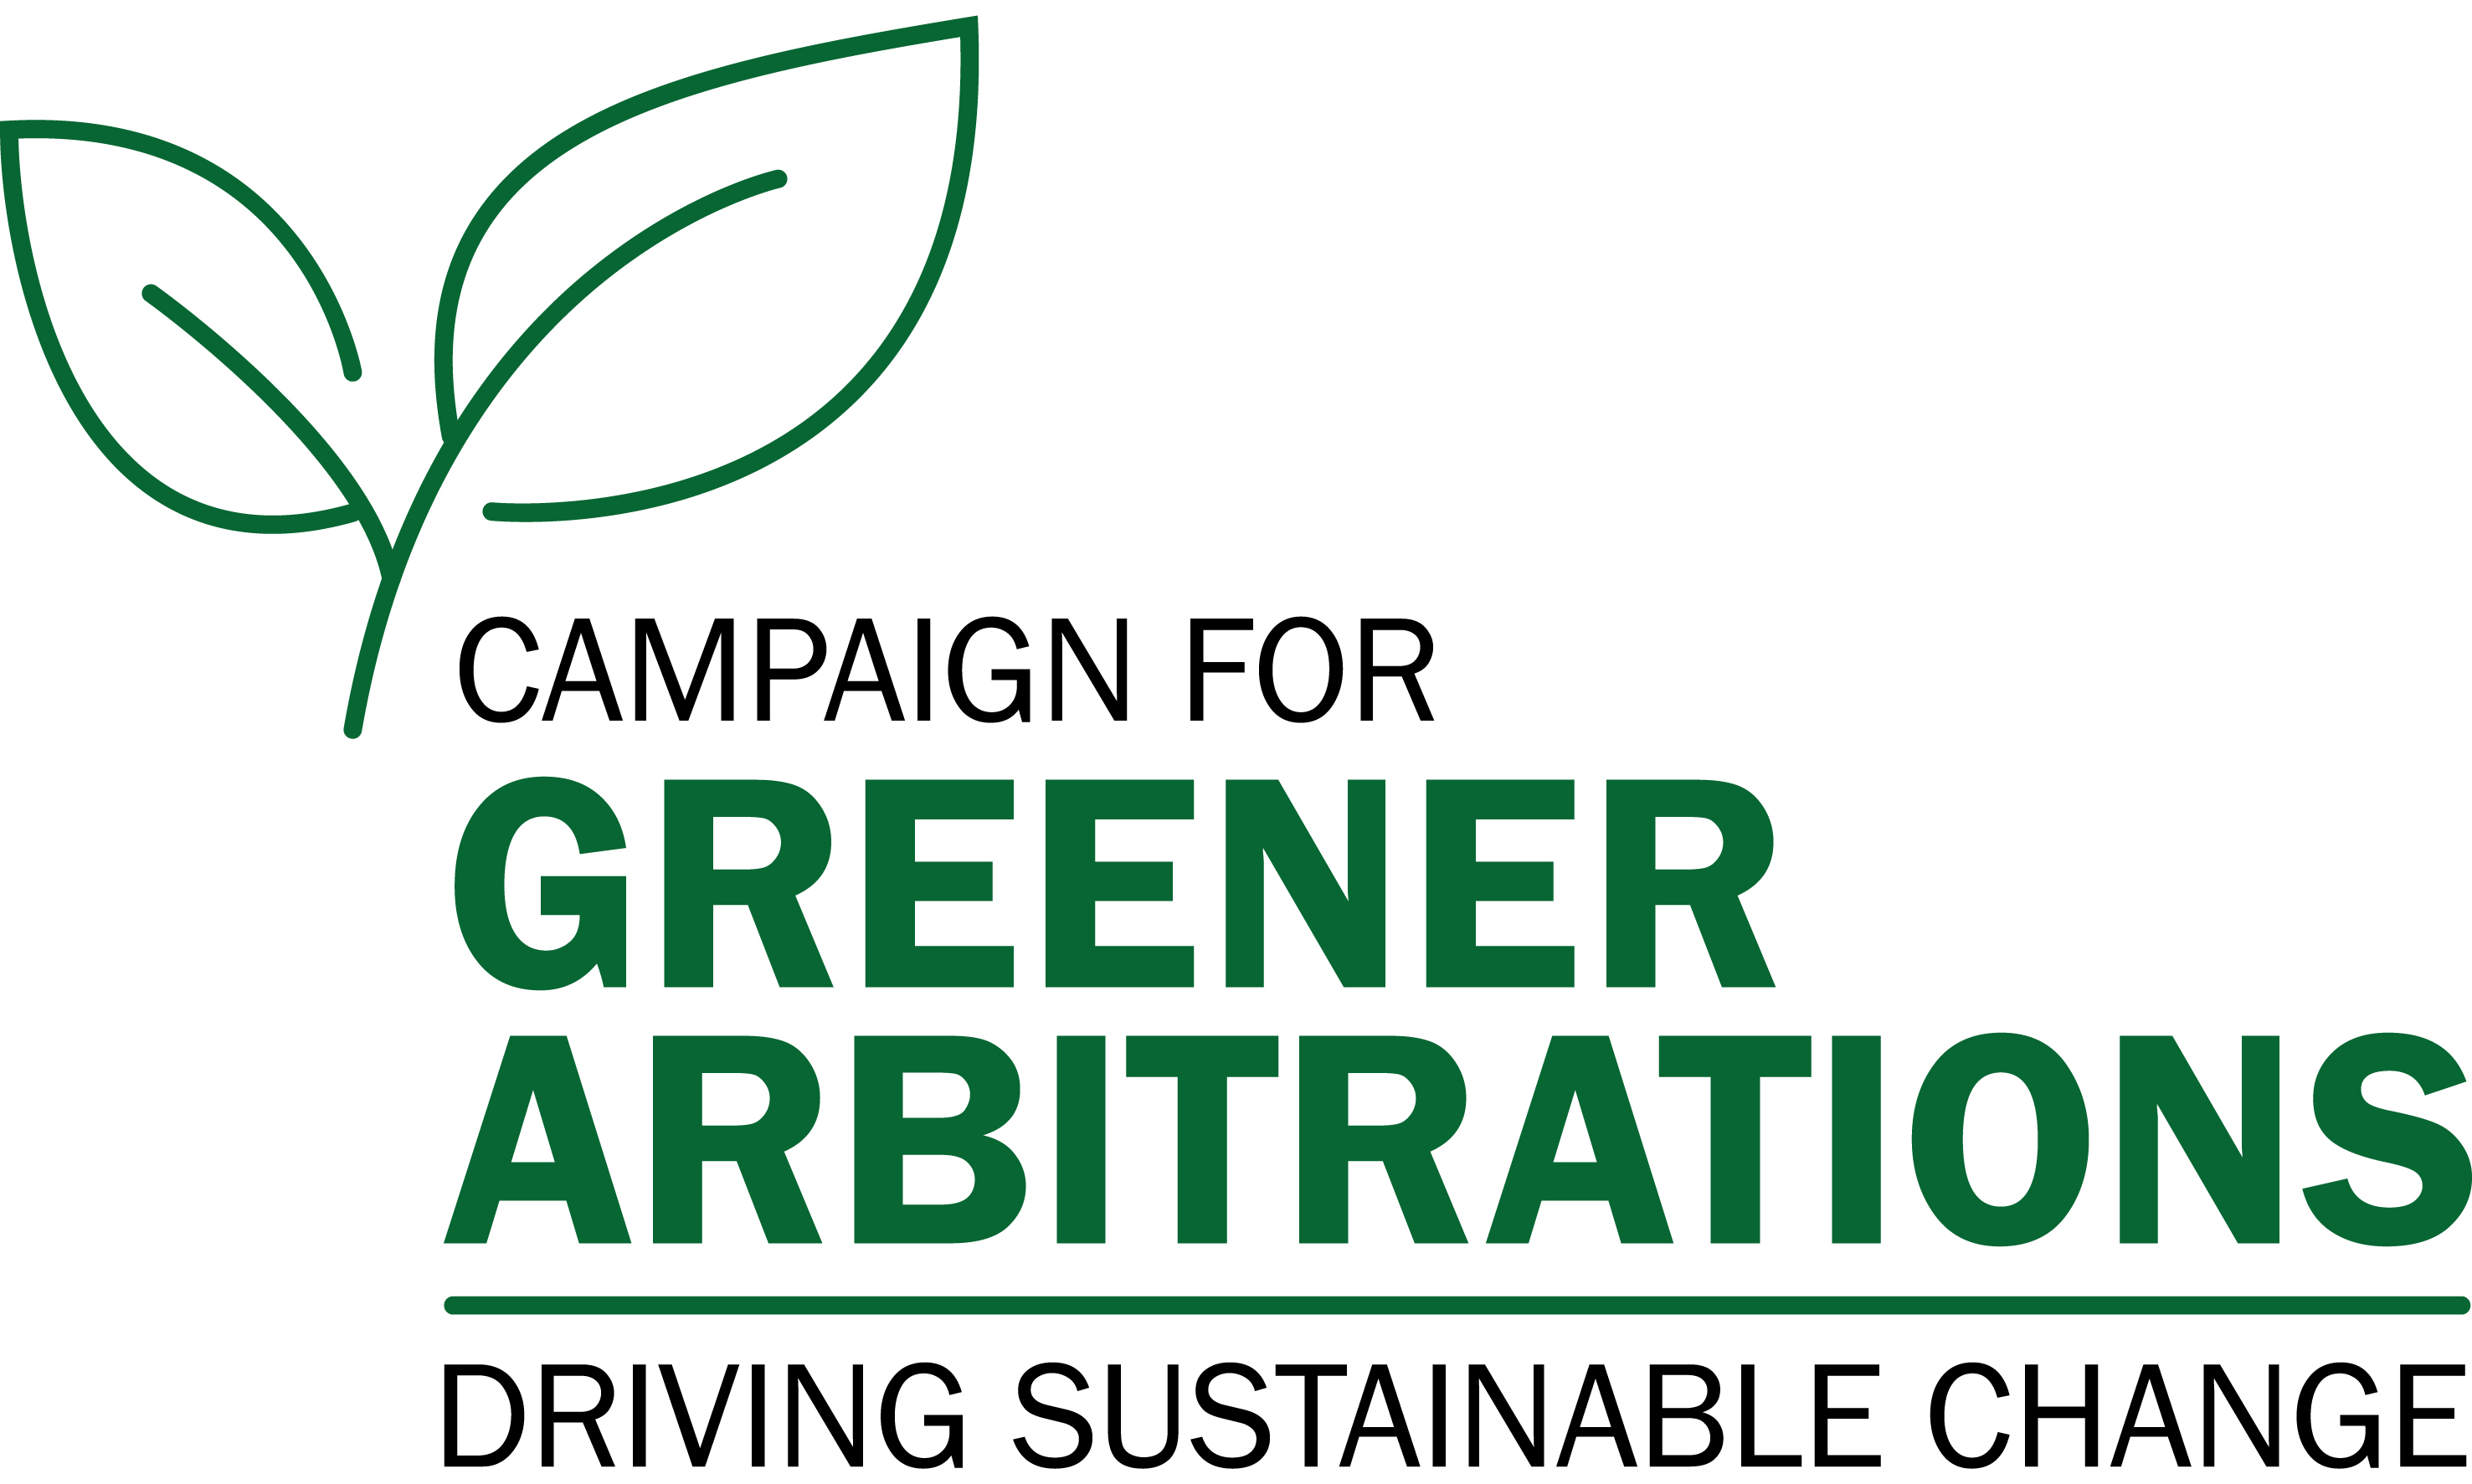 The Campaign for Greener Arbitrations